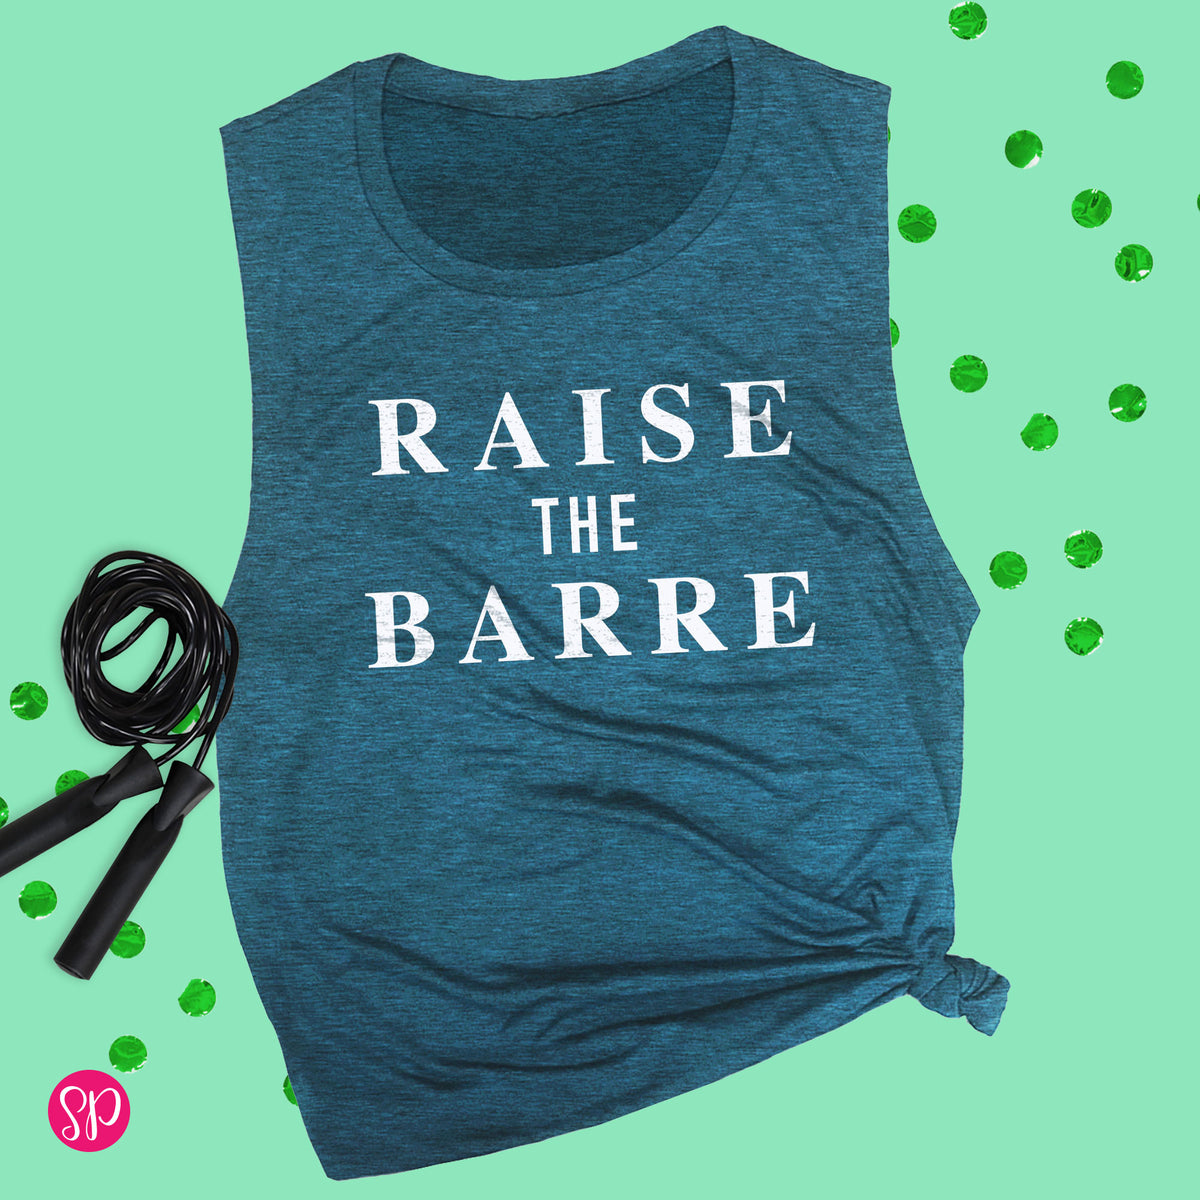 Raise the Barre Workout Fitness Pun Funny Muscle Shirt Tank Top